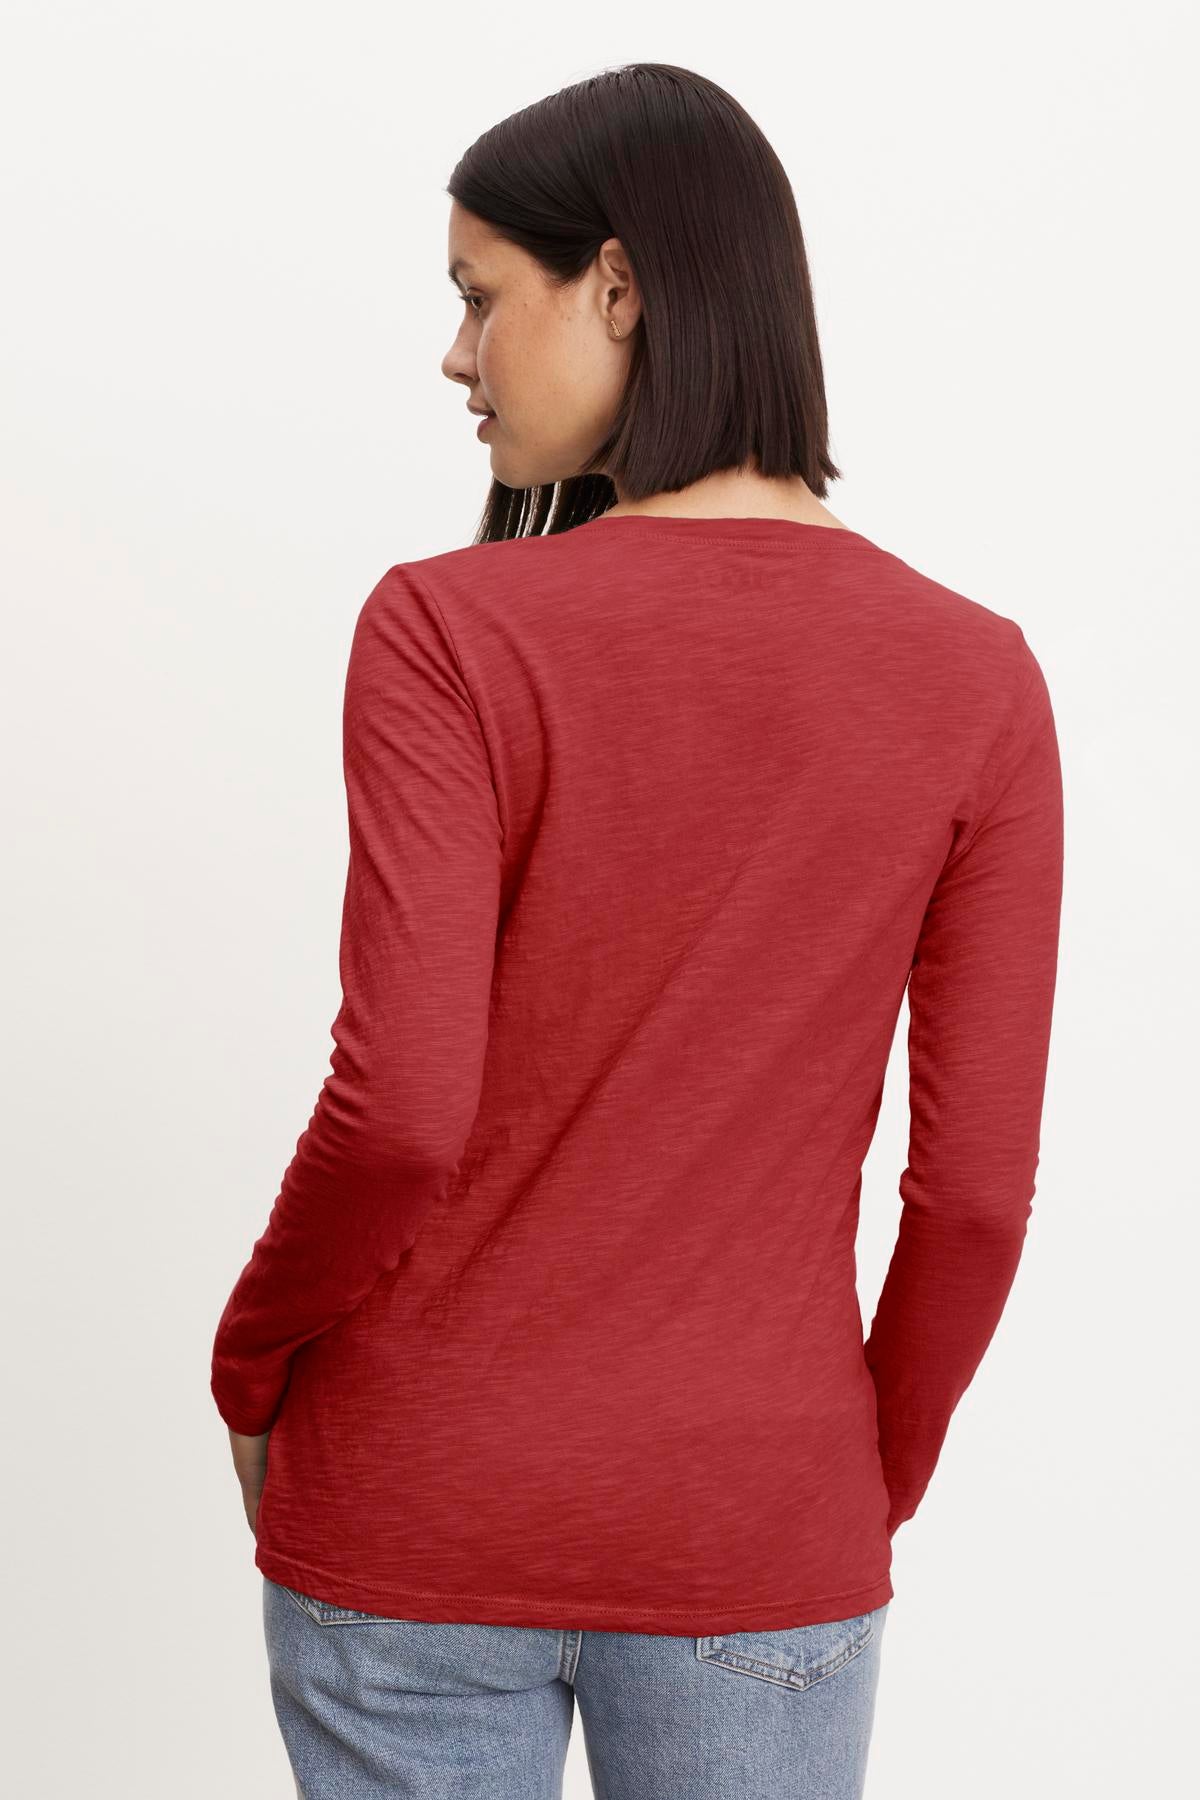 The back view of a woman wearing a red long-sleeved v-neck Blaire Original Slub Tee made from whisper-soft cotton, turning it into a forever piece by Velvet by Graham & Spencer.-35655313916097